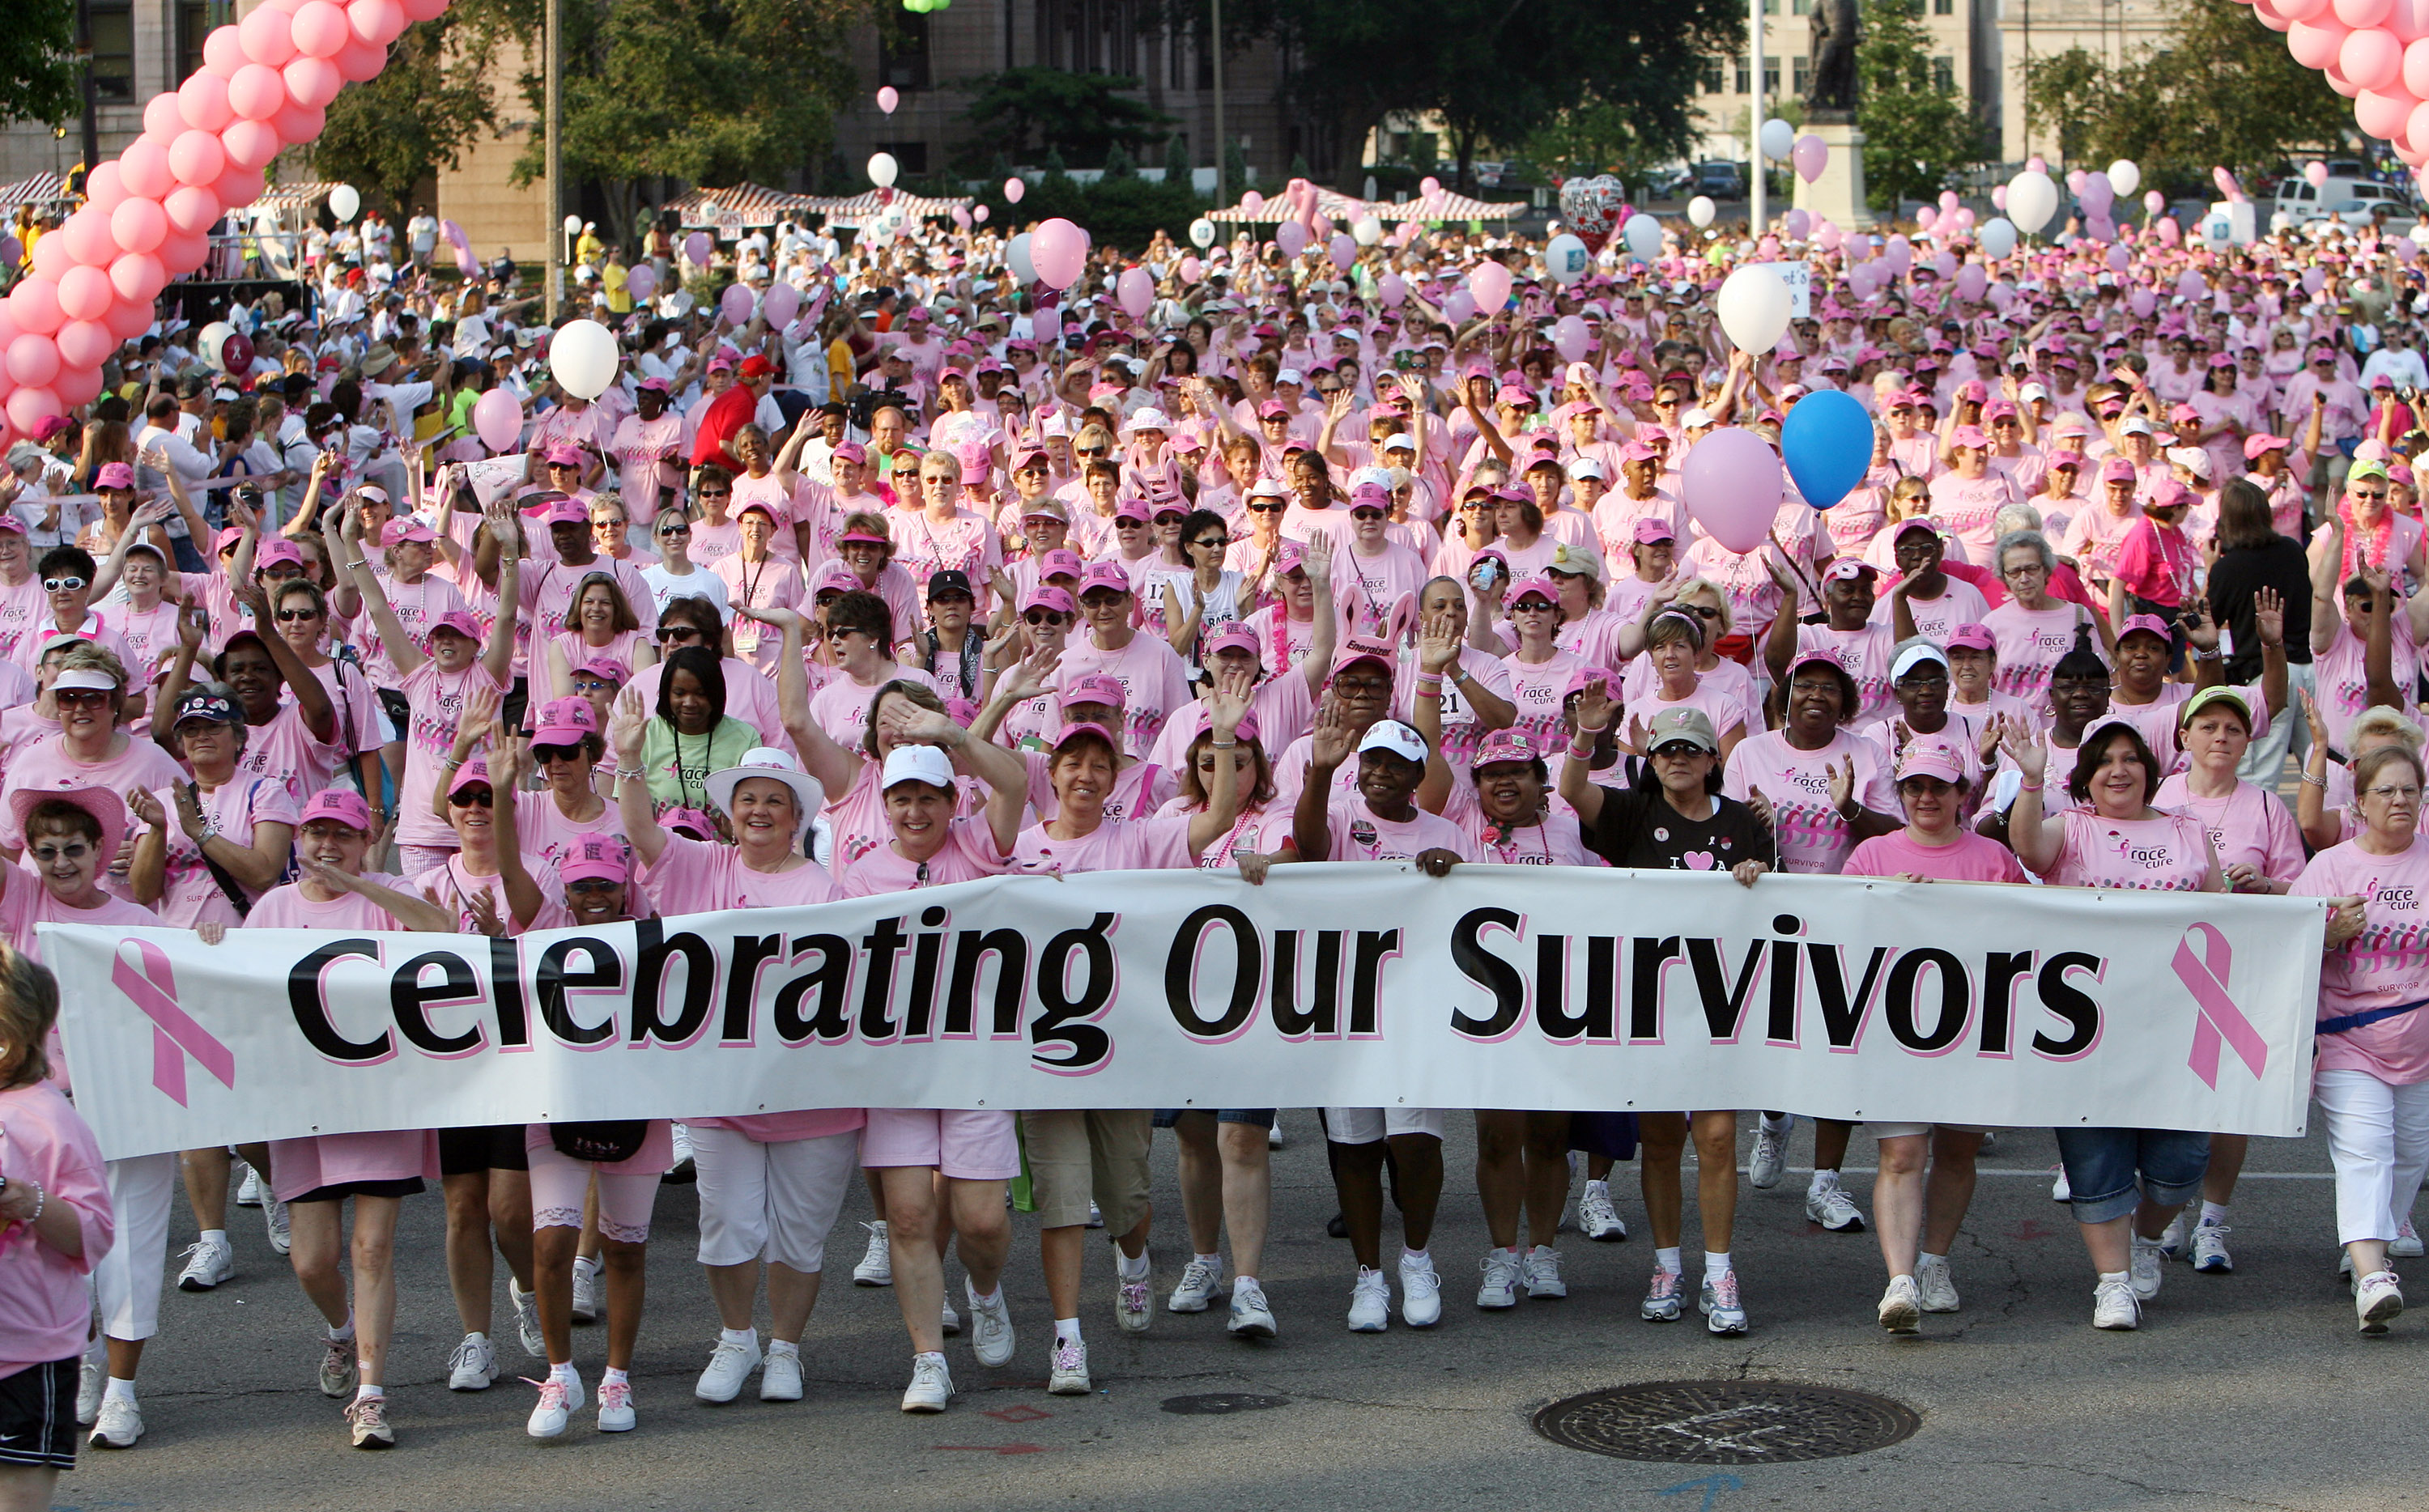 Breast cancer survivors march before the beginning of the Susan G. Komen Race For the Cure in St. Louis on June 16, 2007. Over $2.5 million was raised during the race, while nearly 65 thousand walked and ran in the race. Funds will be used for breast cancer research in the St. Louis area. (UPI Photo/Bill Greenblatt) (Newscom TagID: upiphotos785660) [Photo via Newscom]